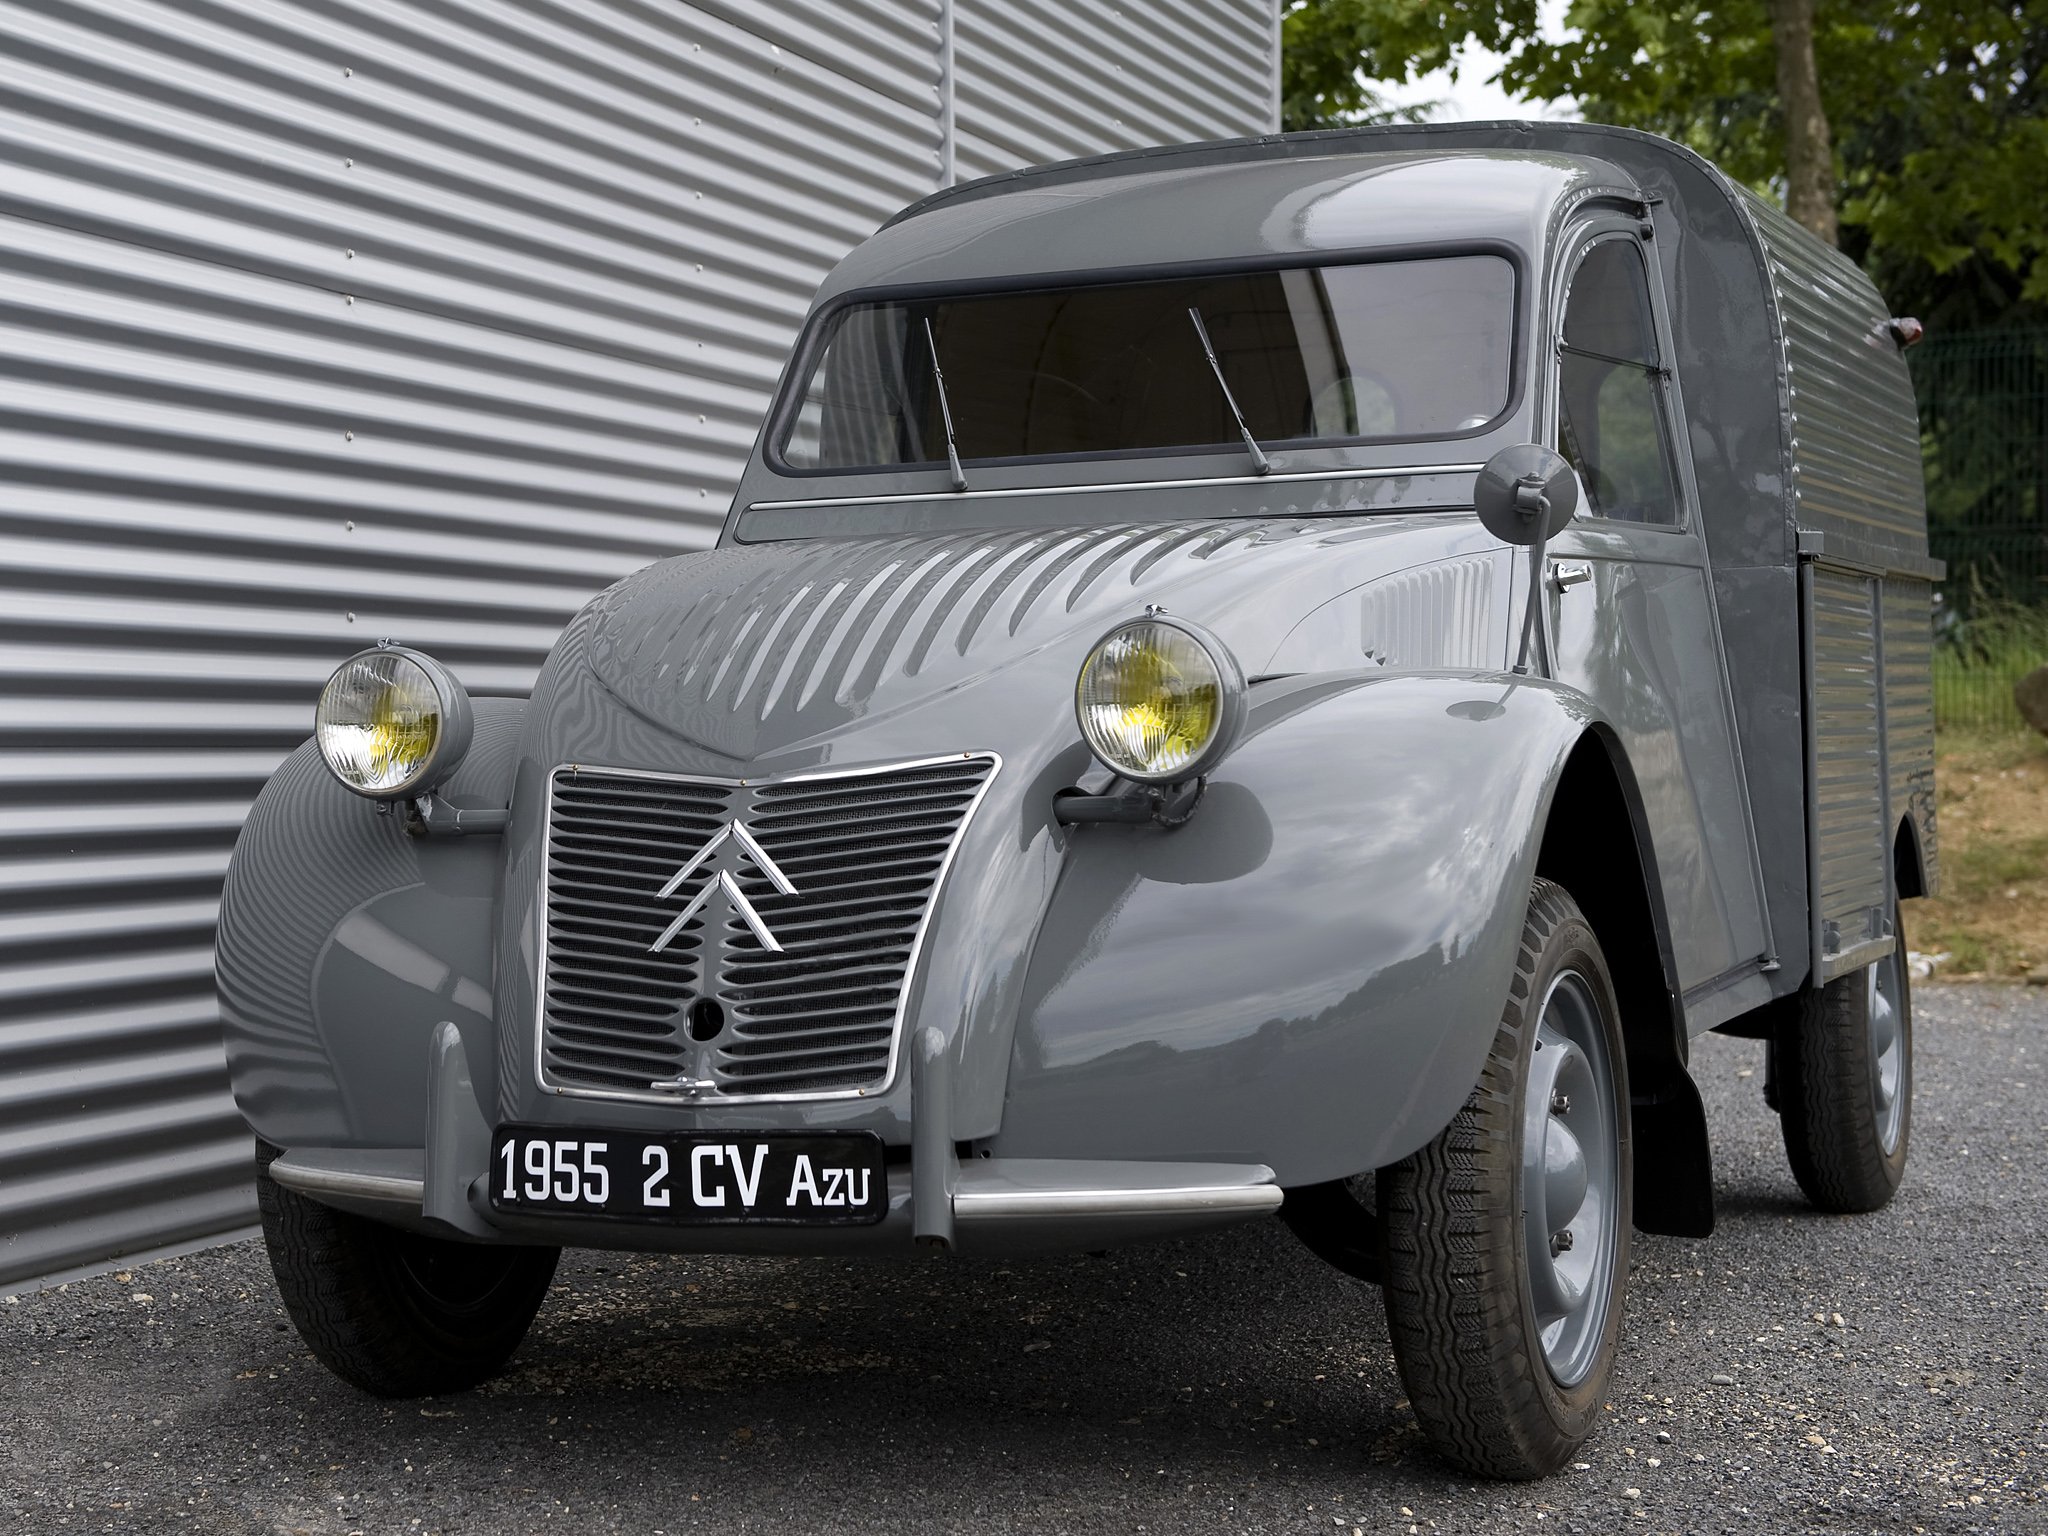 2cv, Citroen, Classic, Cars, French, Fourgonnette, Delivery Wallpaper